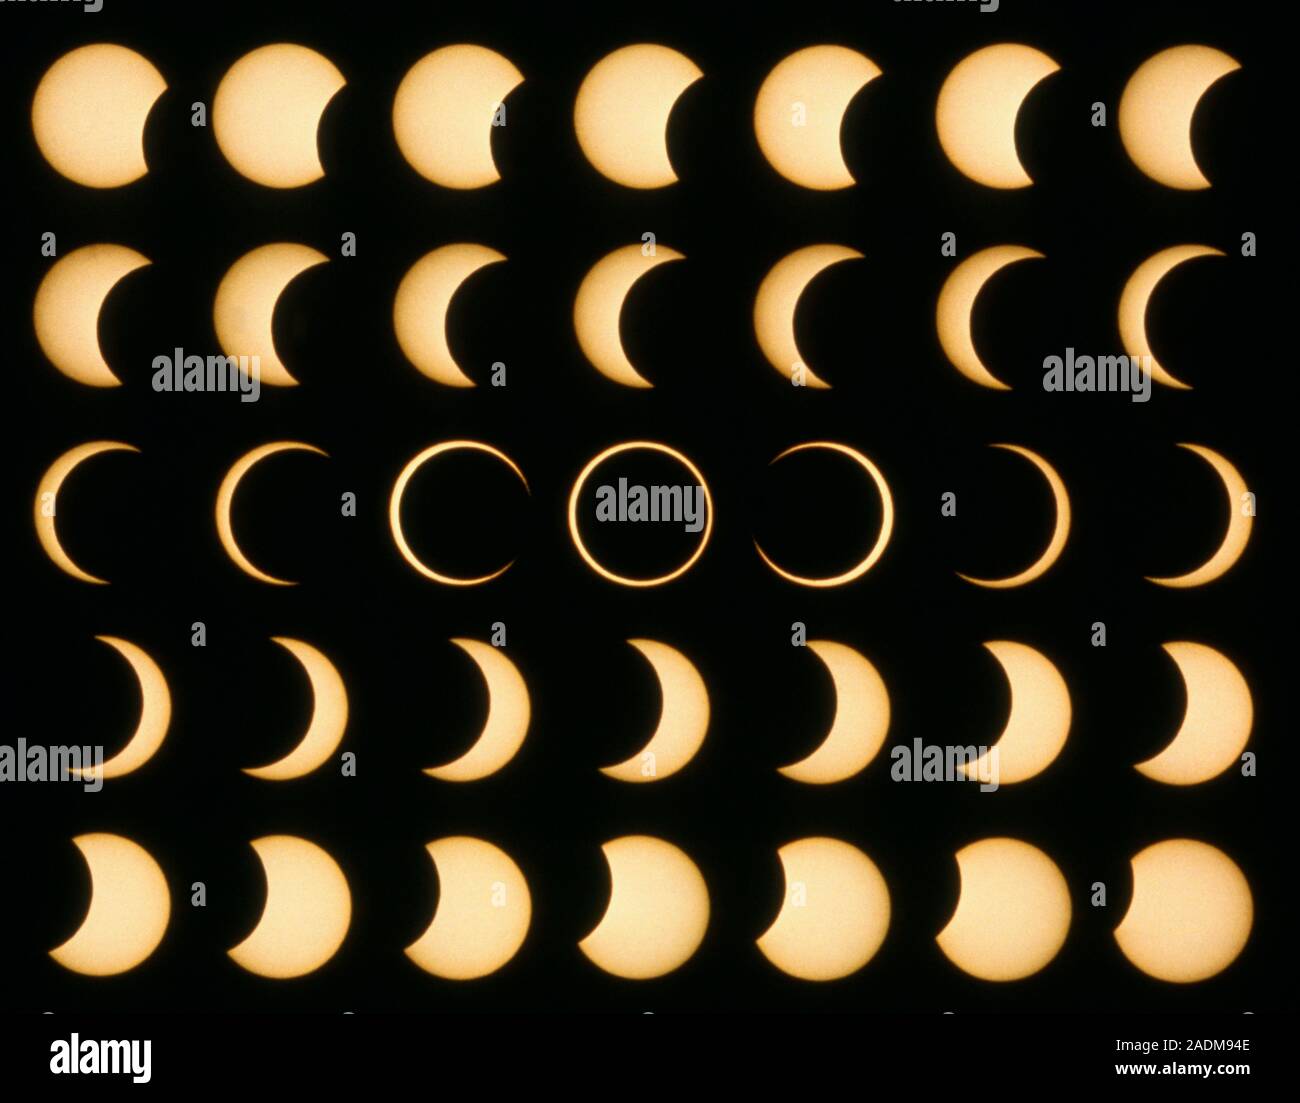 Annular solar eclipse. Time lapse mosaic image of an annular solar eclipse. A solar eclipse occurs when the moon passes between the Earth and the Sun, Stock Photo